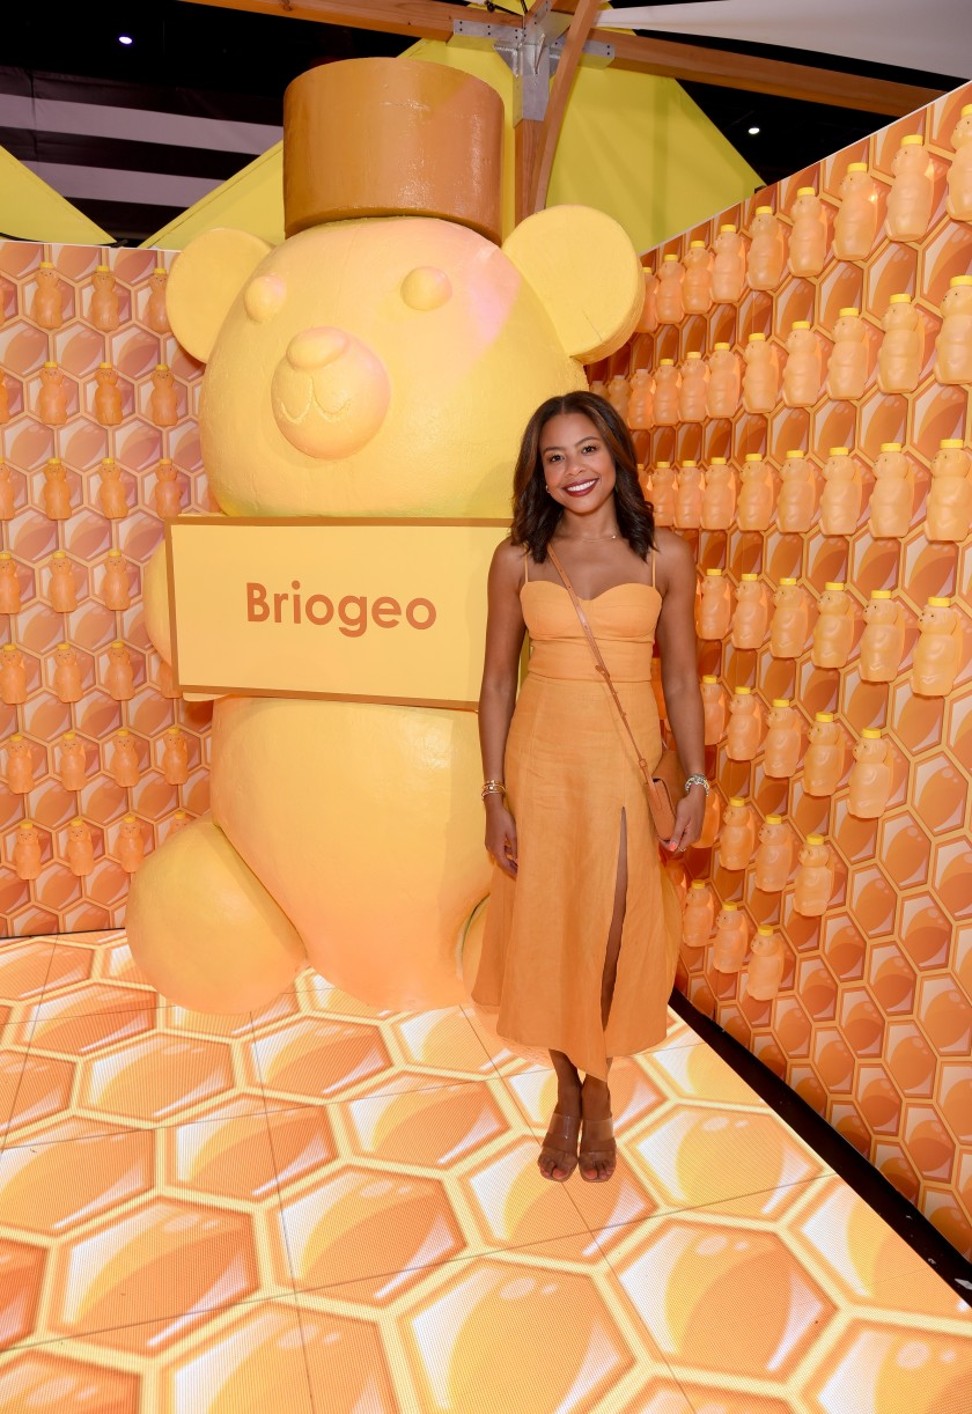 Briogeo founder Nancy Twine stands next to Briogeo’s display for its new honey hair mask. Photo: Getty Images